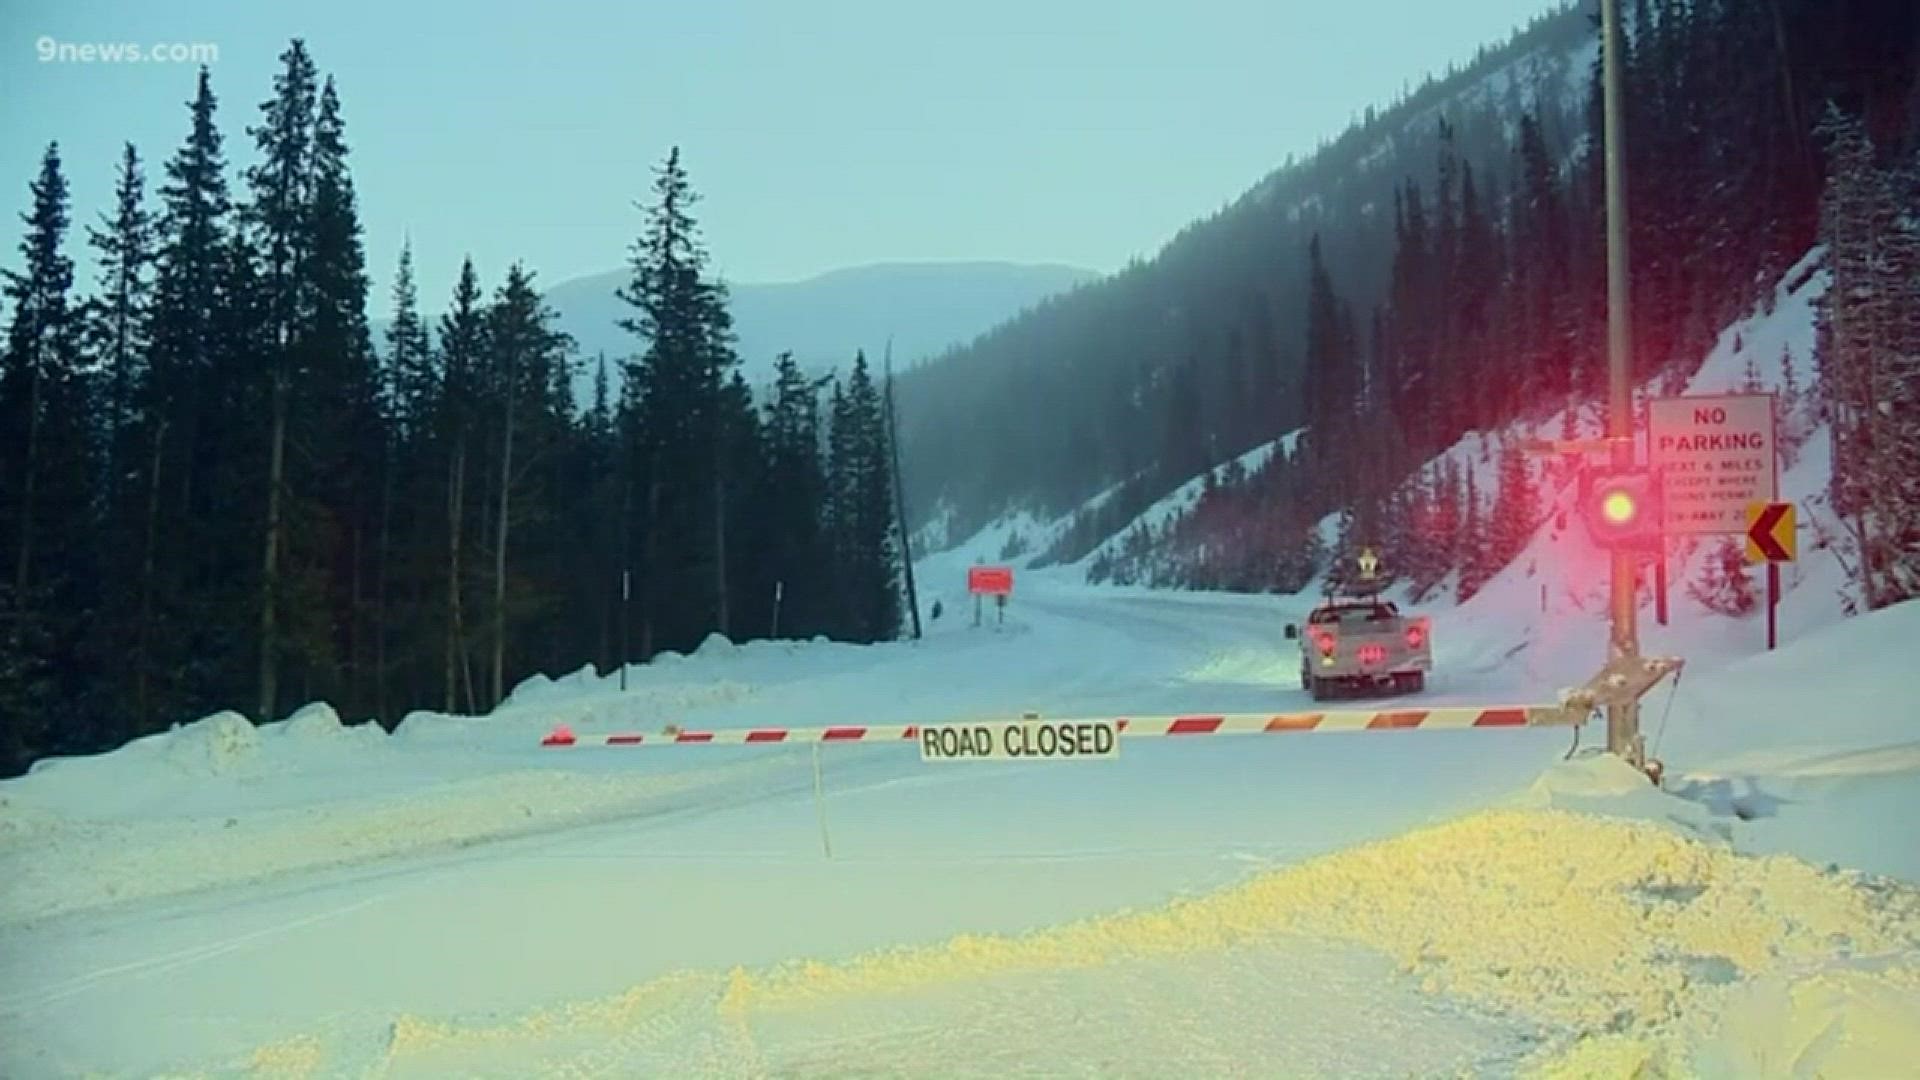 Watch as crews perform avalanche mitigation work near Loveland Pass after a snowslide forced a full closure of the US 6 over the pass.